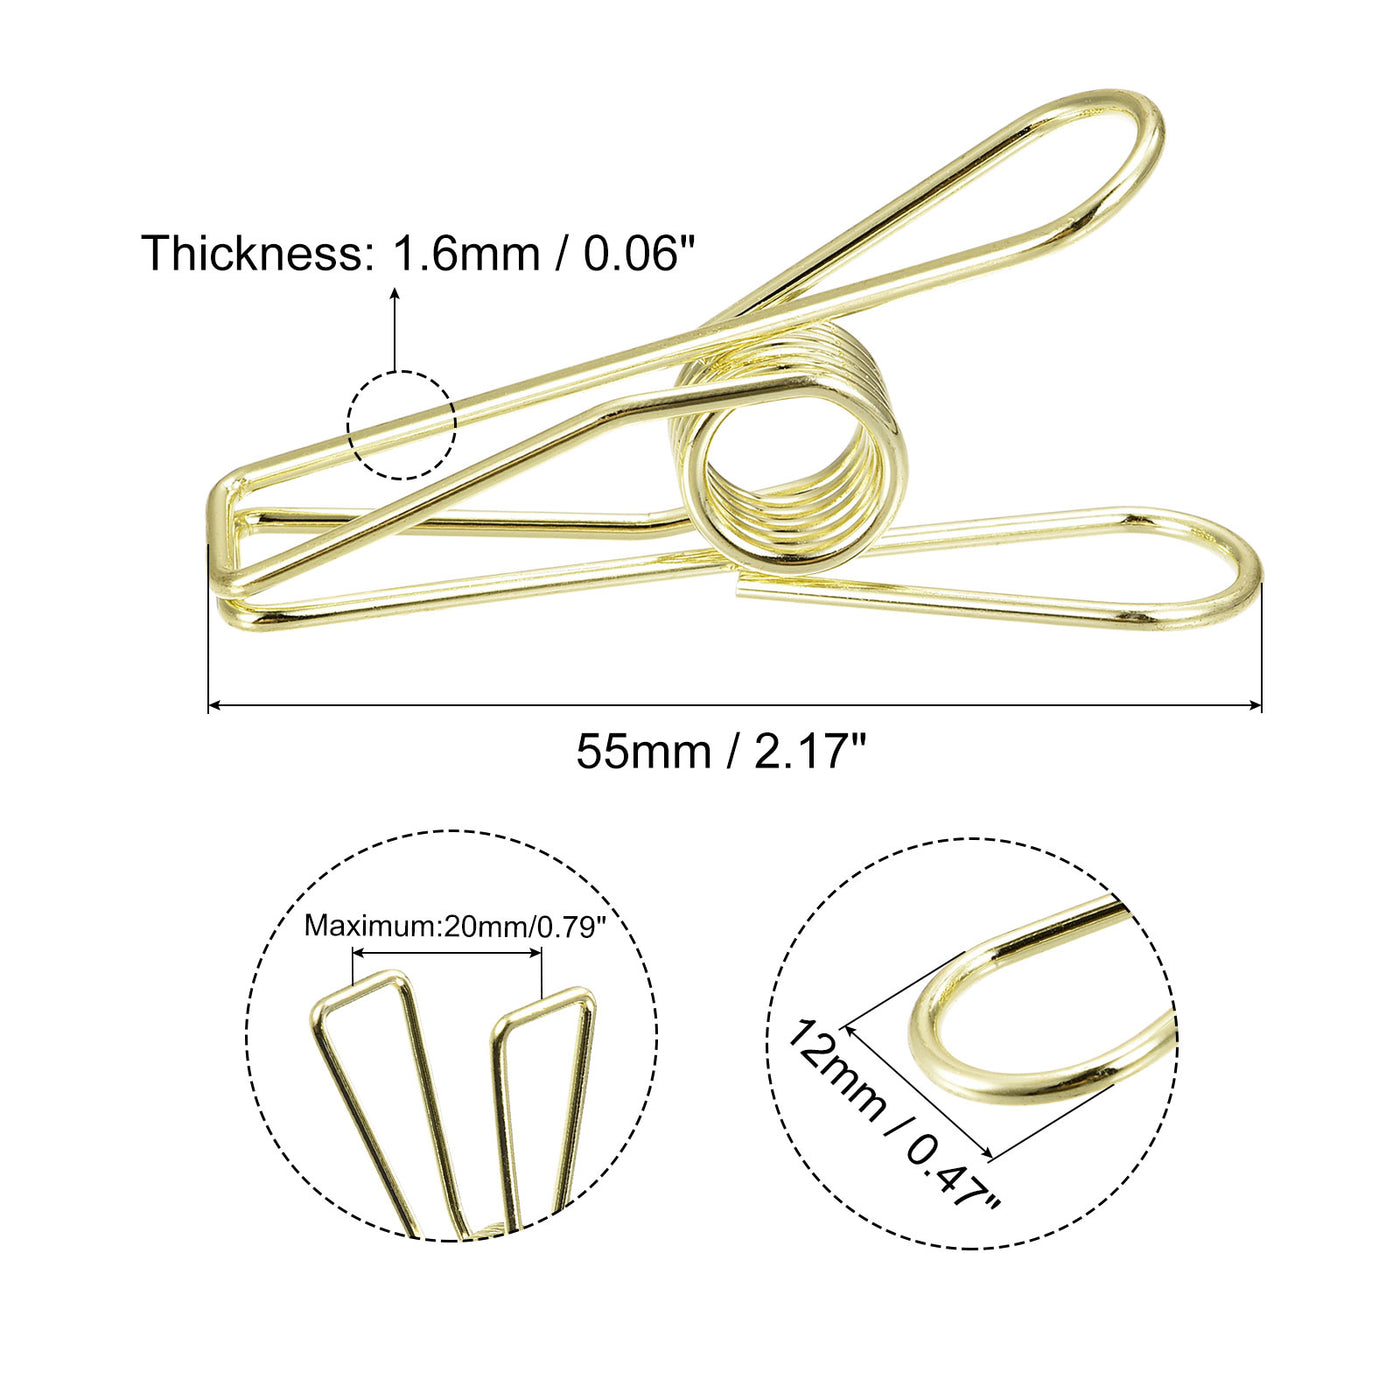 uxcell Uxcell Tablecloth Clips, 55mm Carbon Steel Clamps for Fixing Table Cloth, Gold 8 Pcs